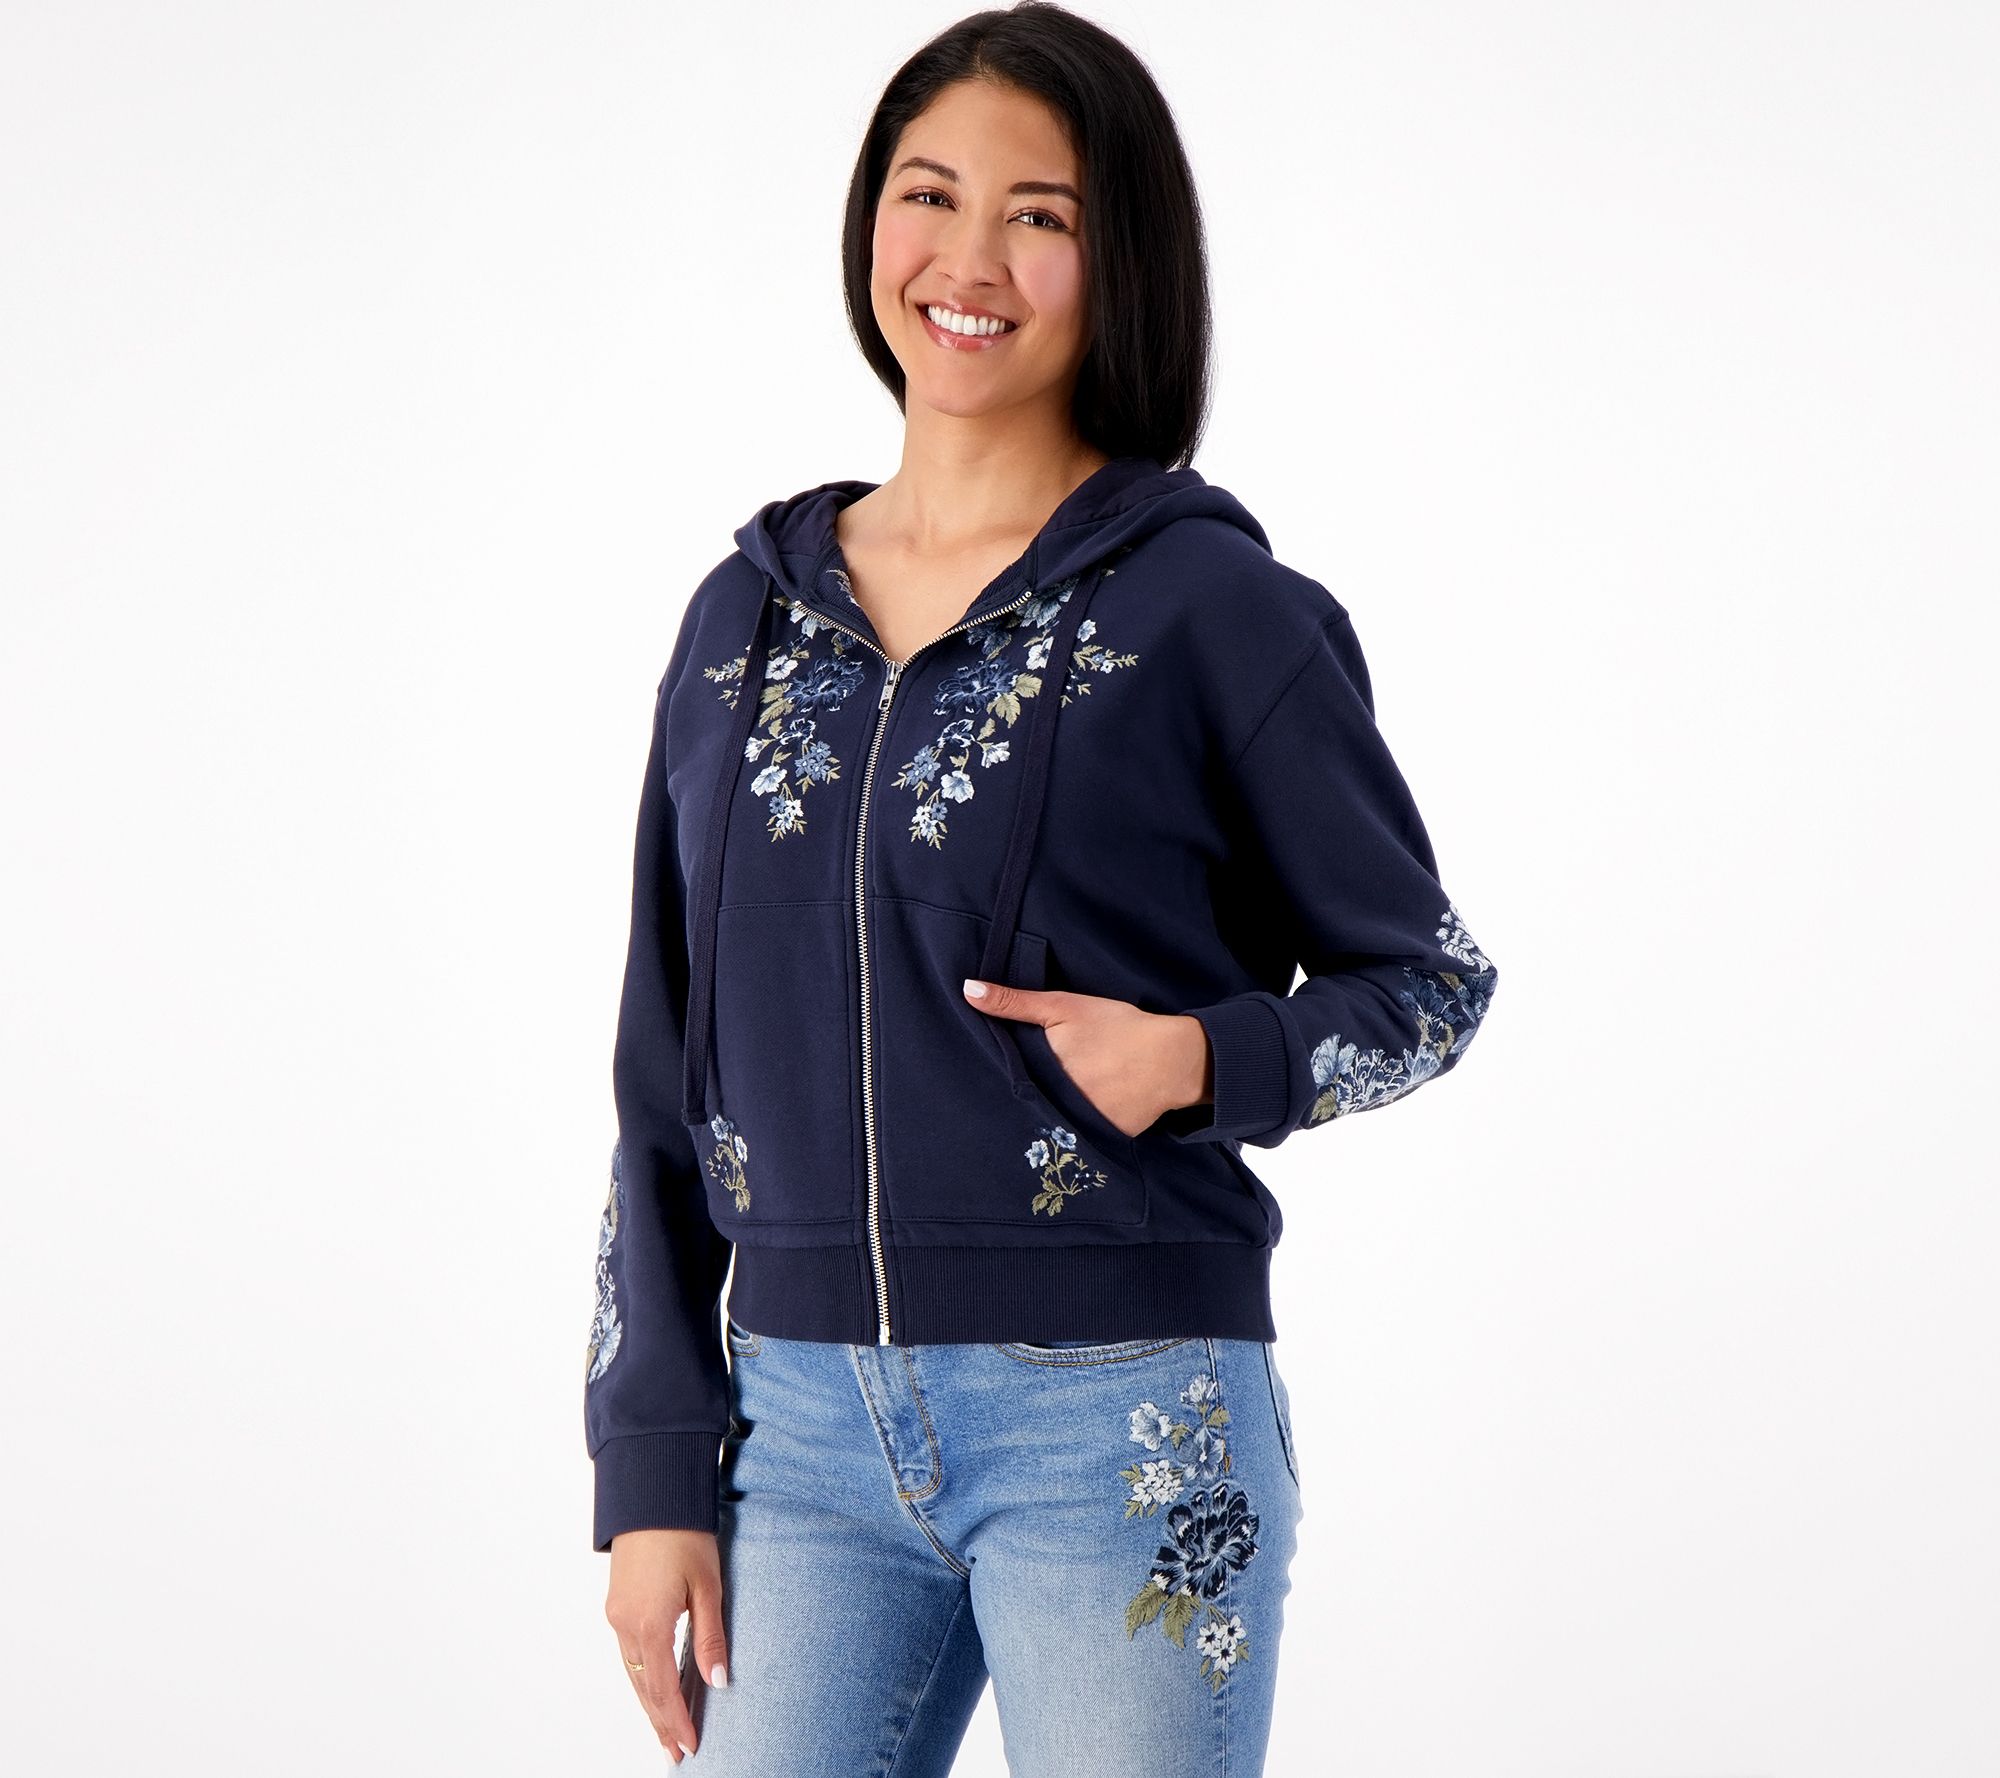 Driftwood Jeans Embroidered Zip-Up Hoodie- Blue Bell Fleur